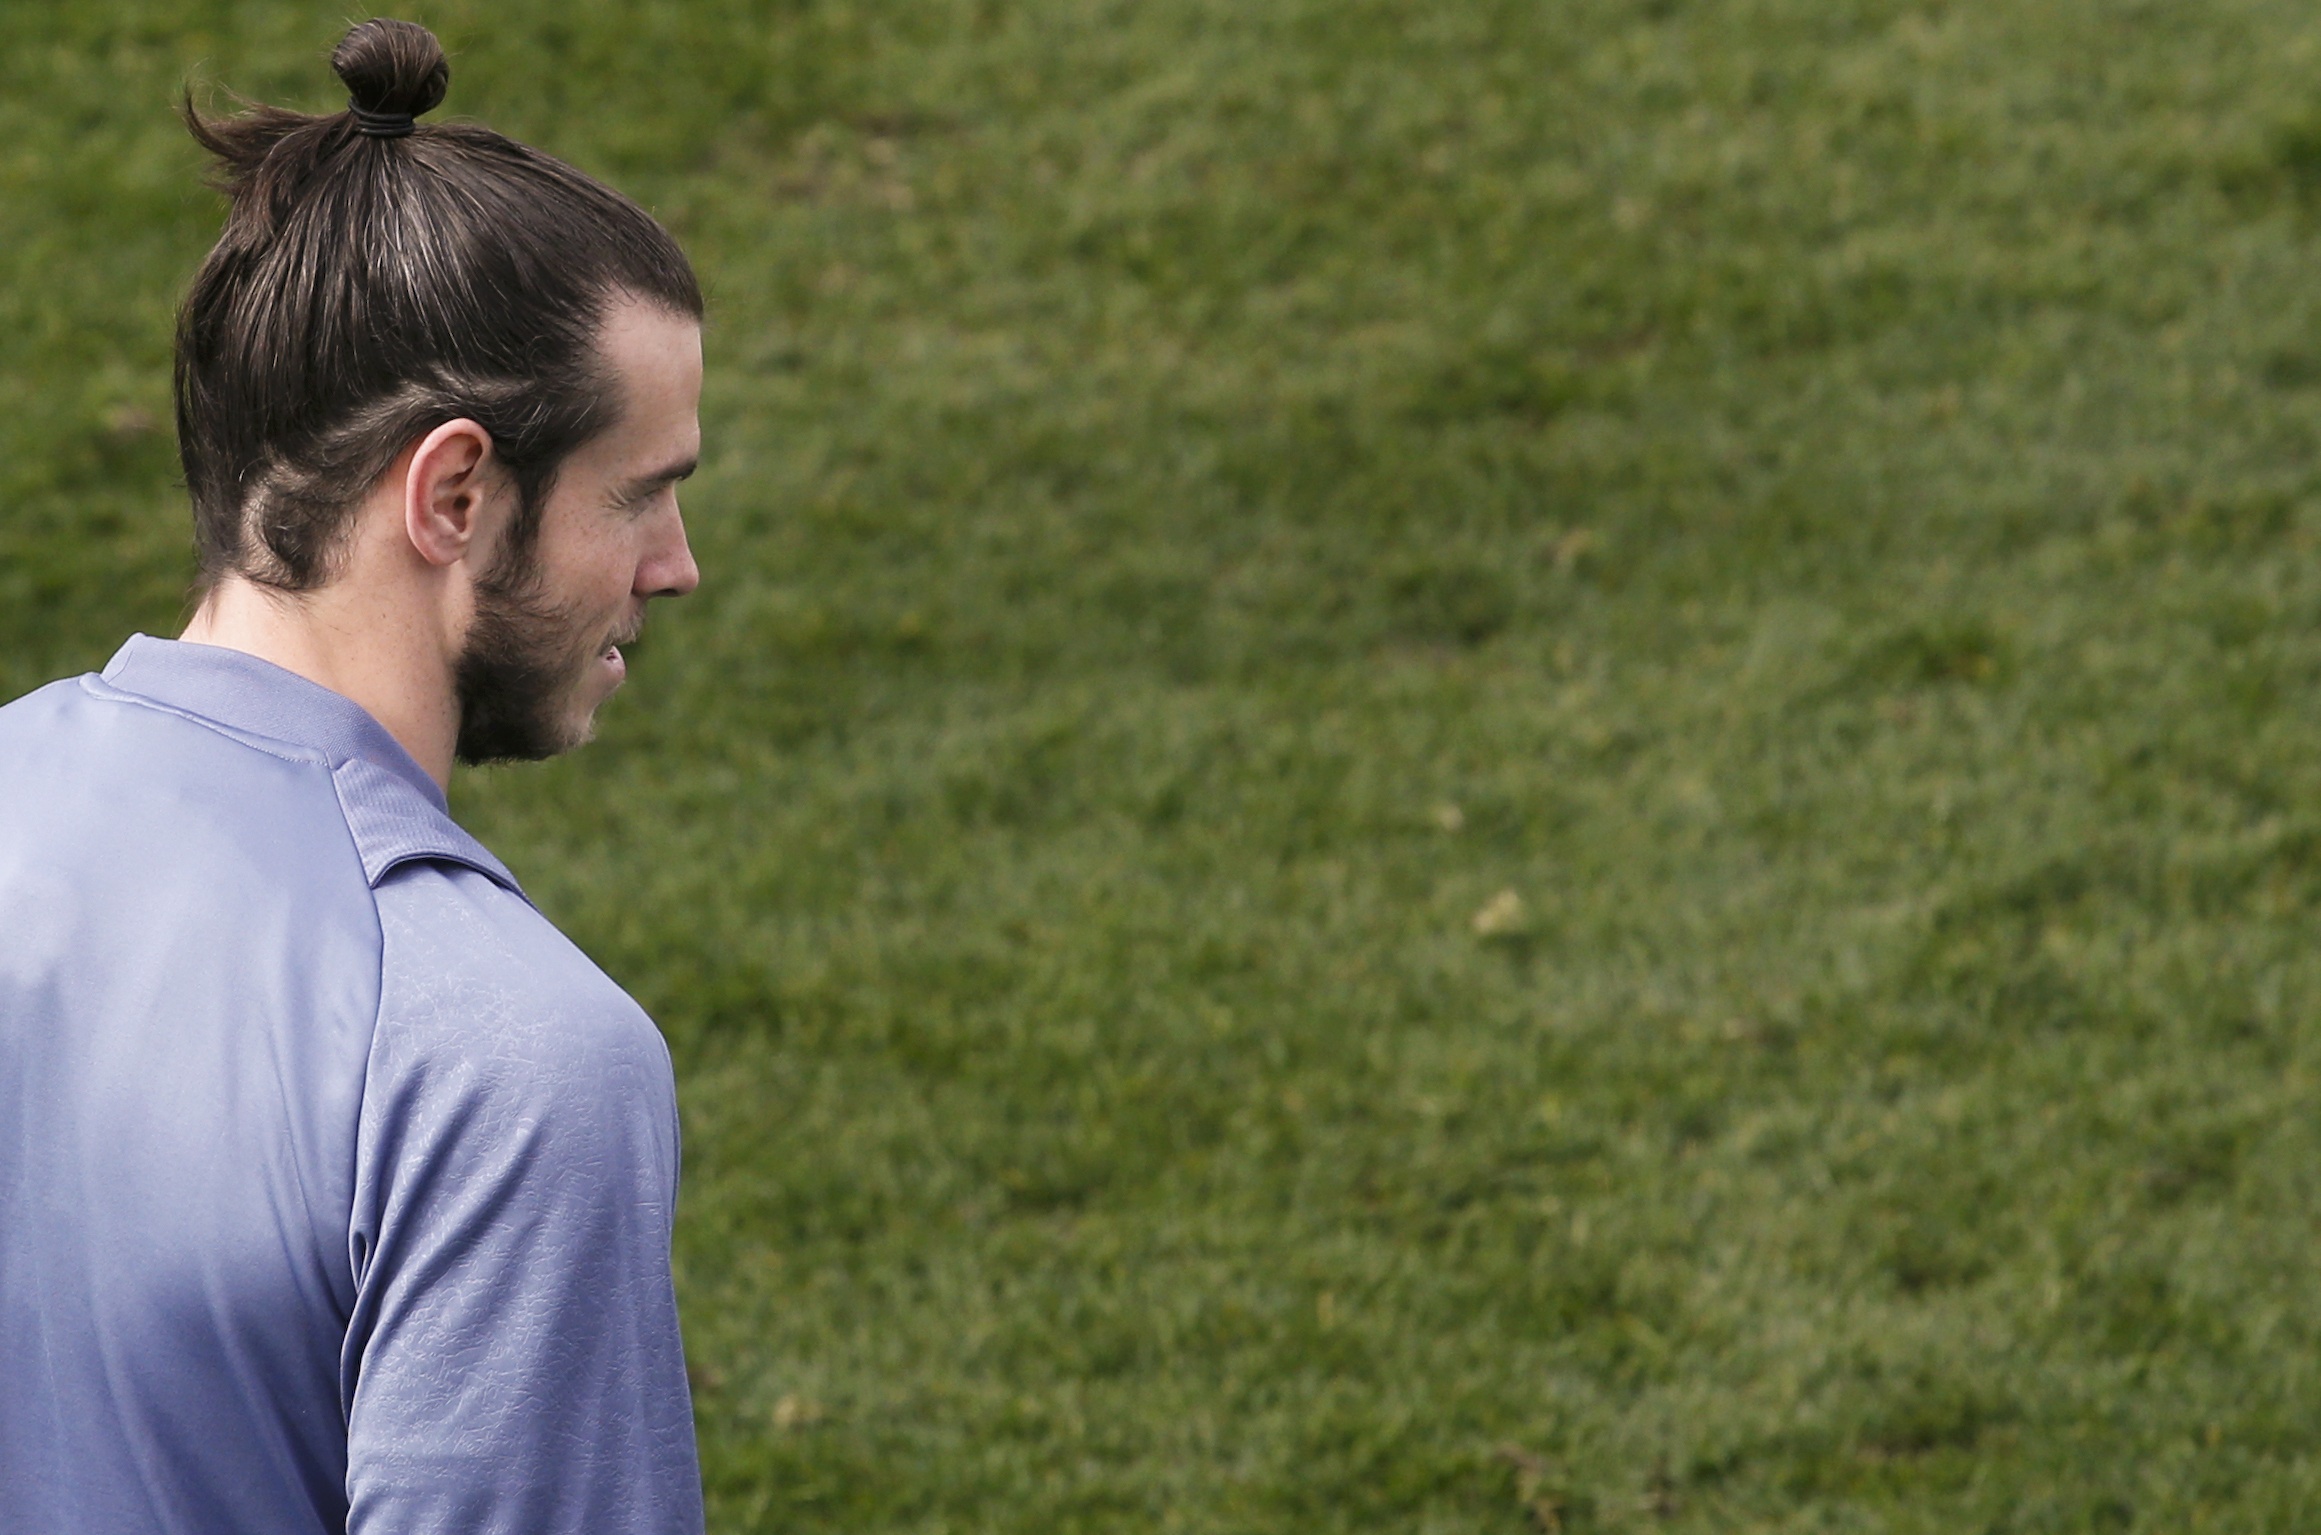 Football: Bale won't be risked for Real's Napoli showdown, says Zidane